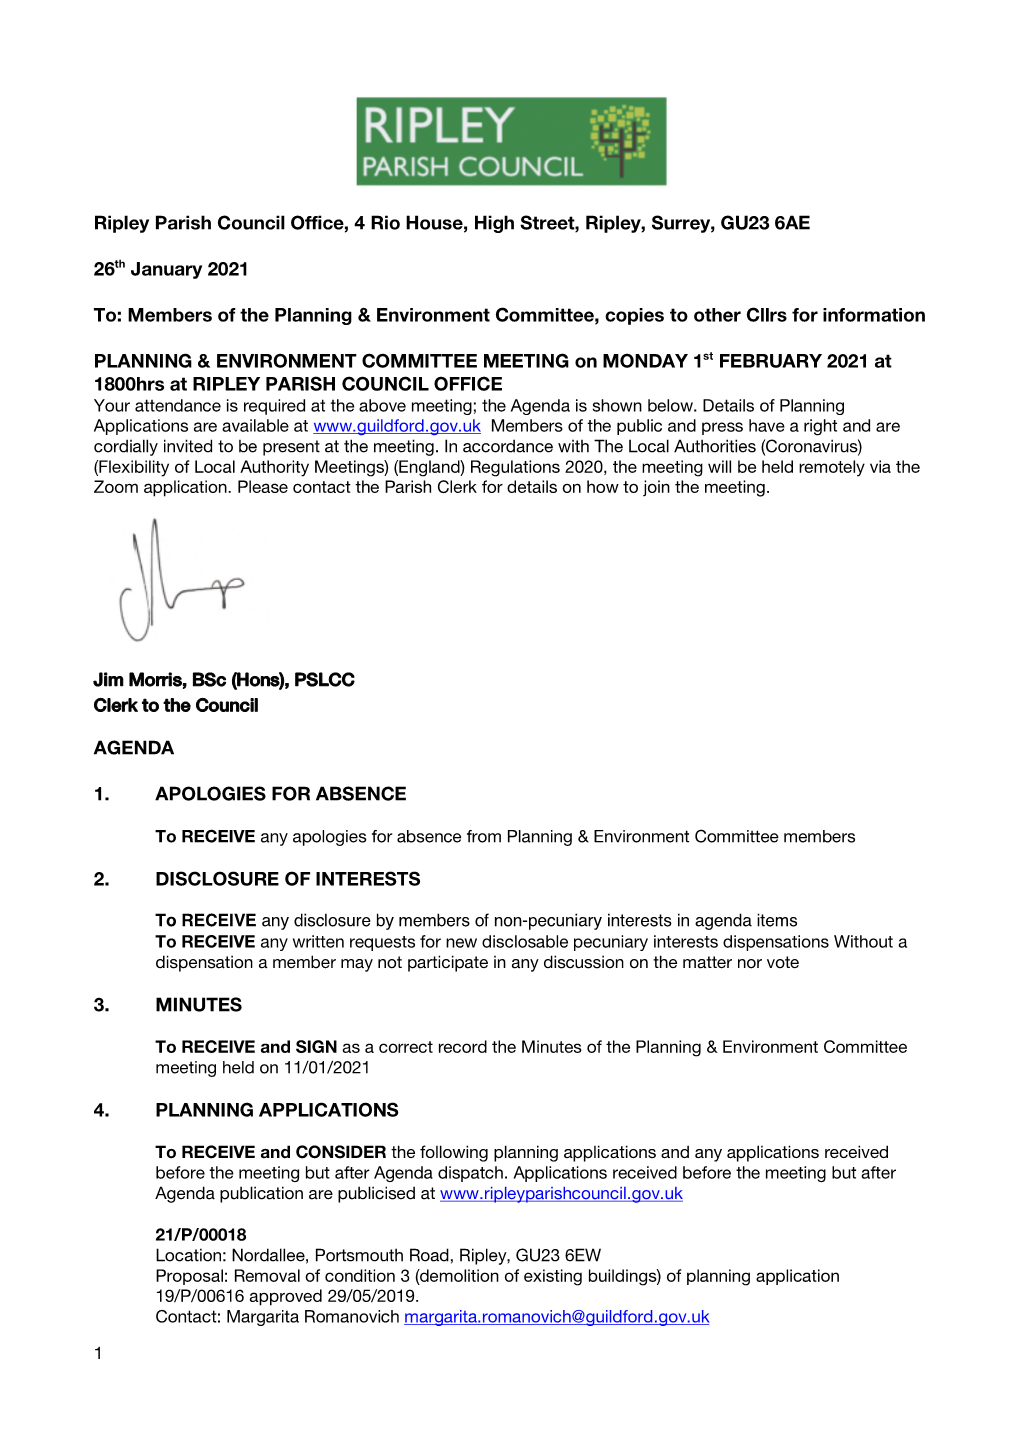 Members of the Planning & Environment Committee, Copies to Other Cllrs for Information